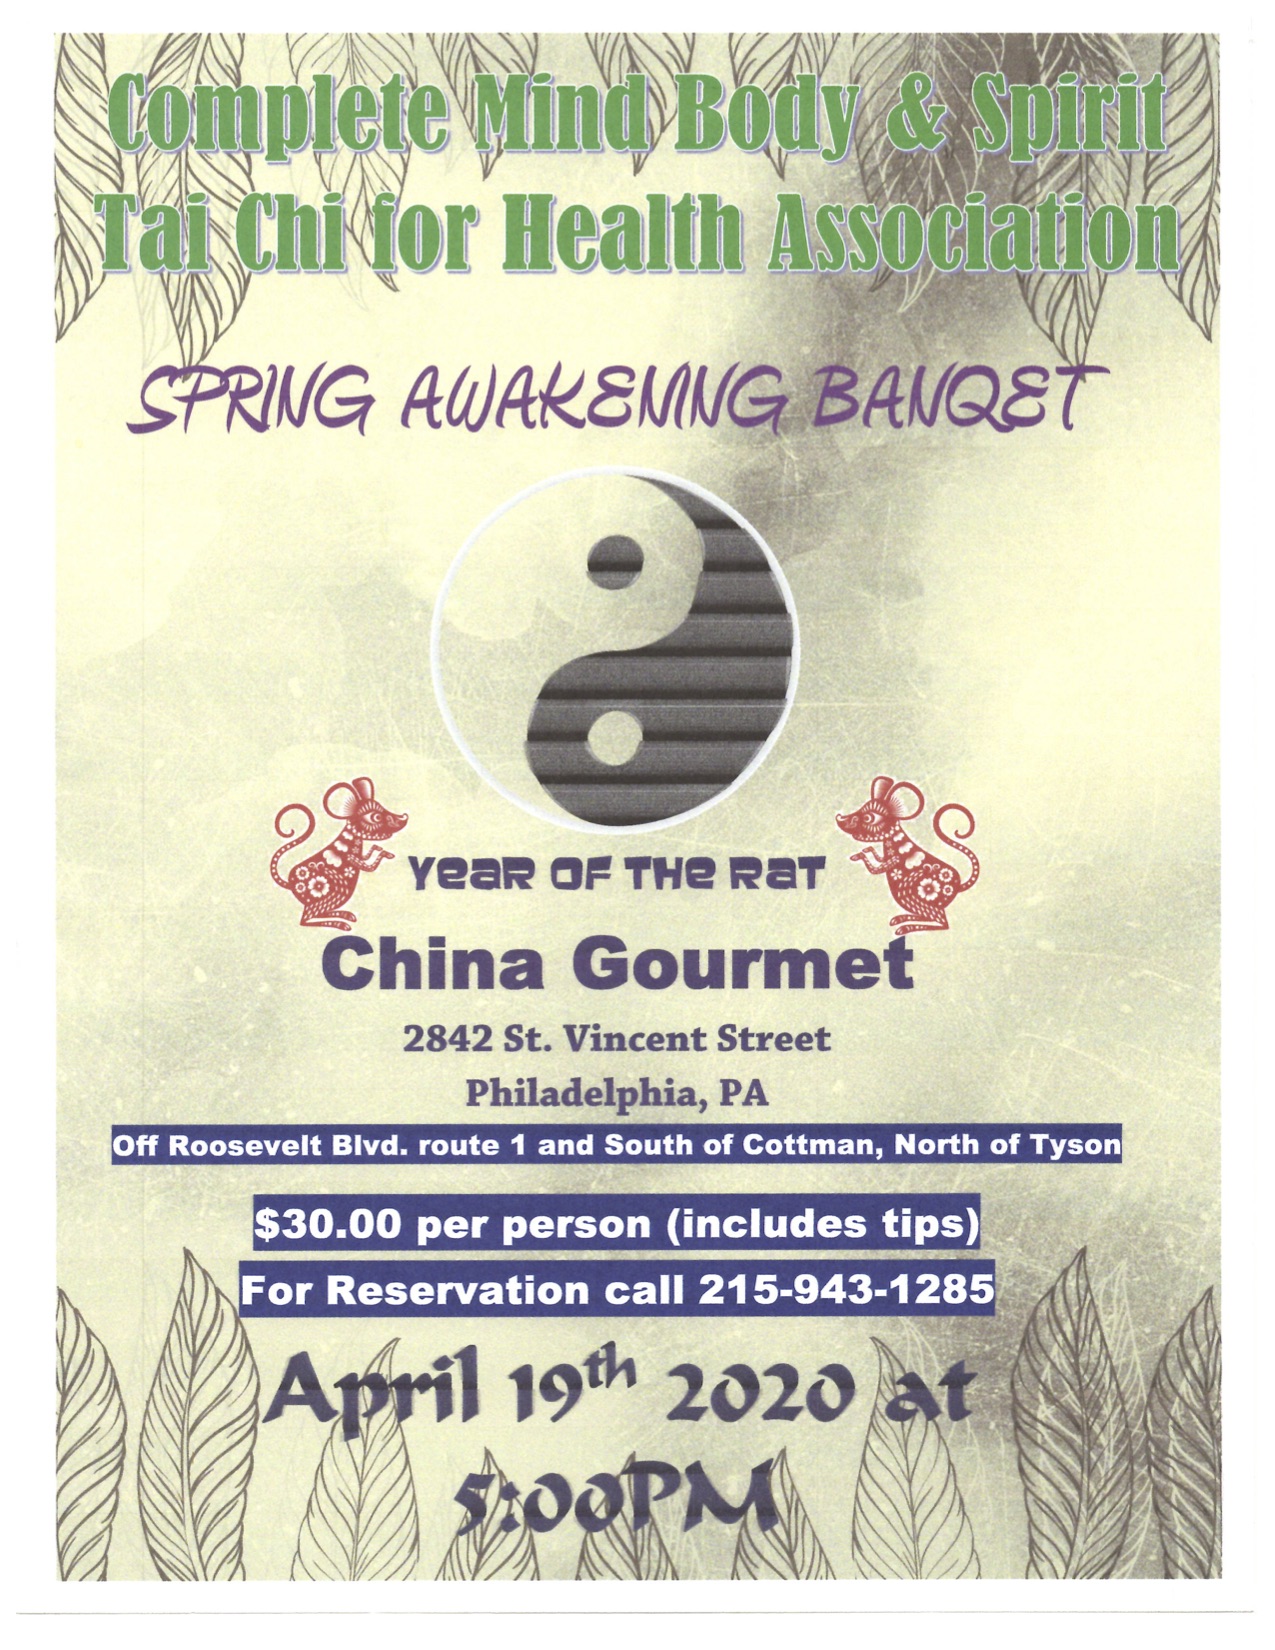 Flyer for the April 19th banquet.